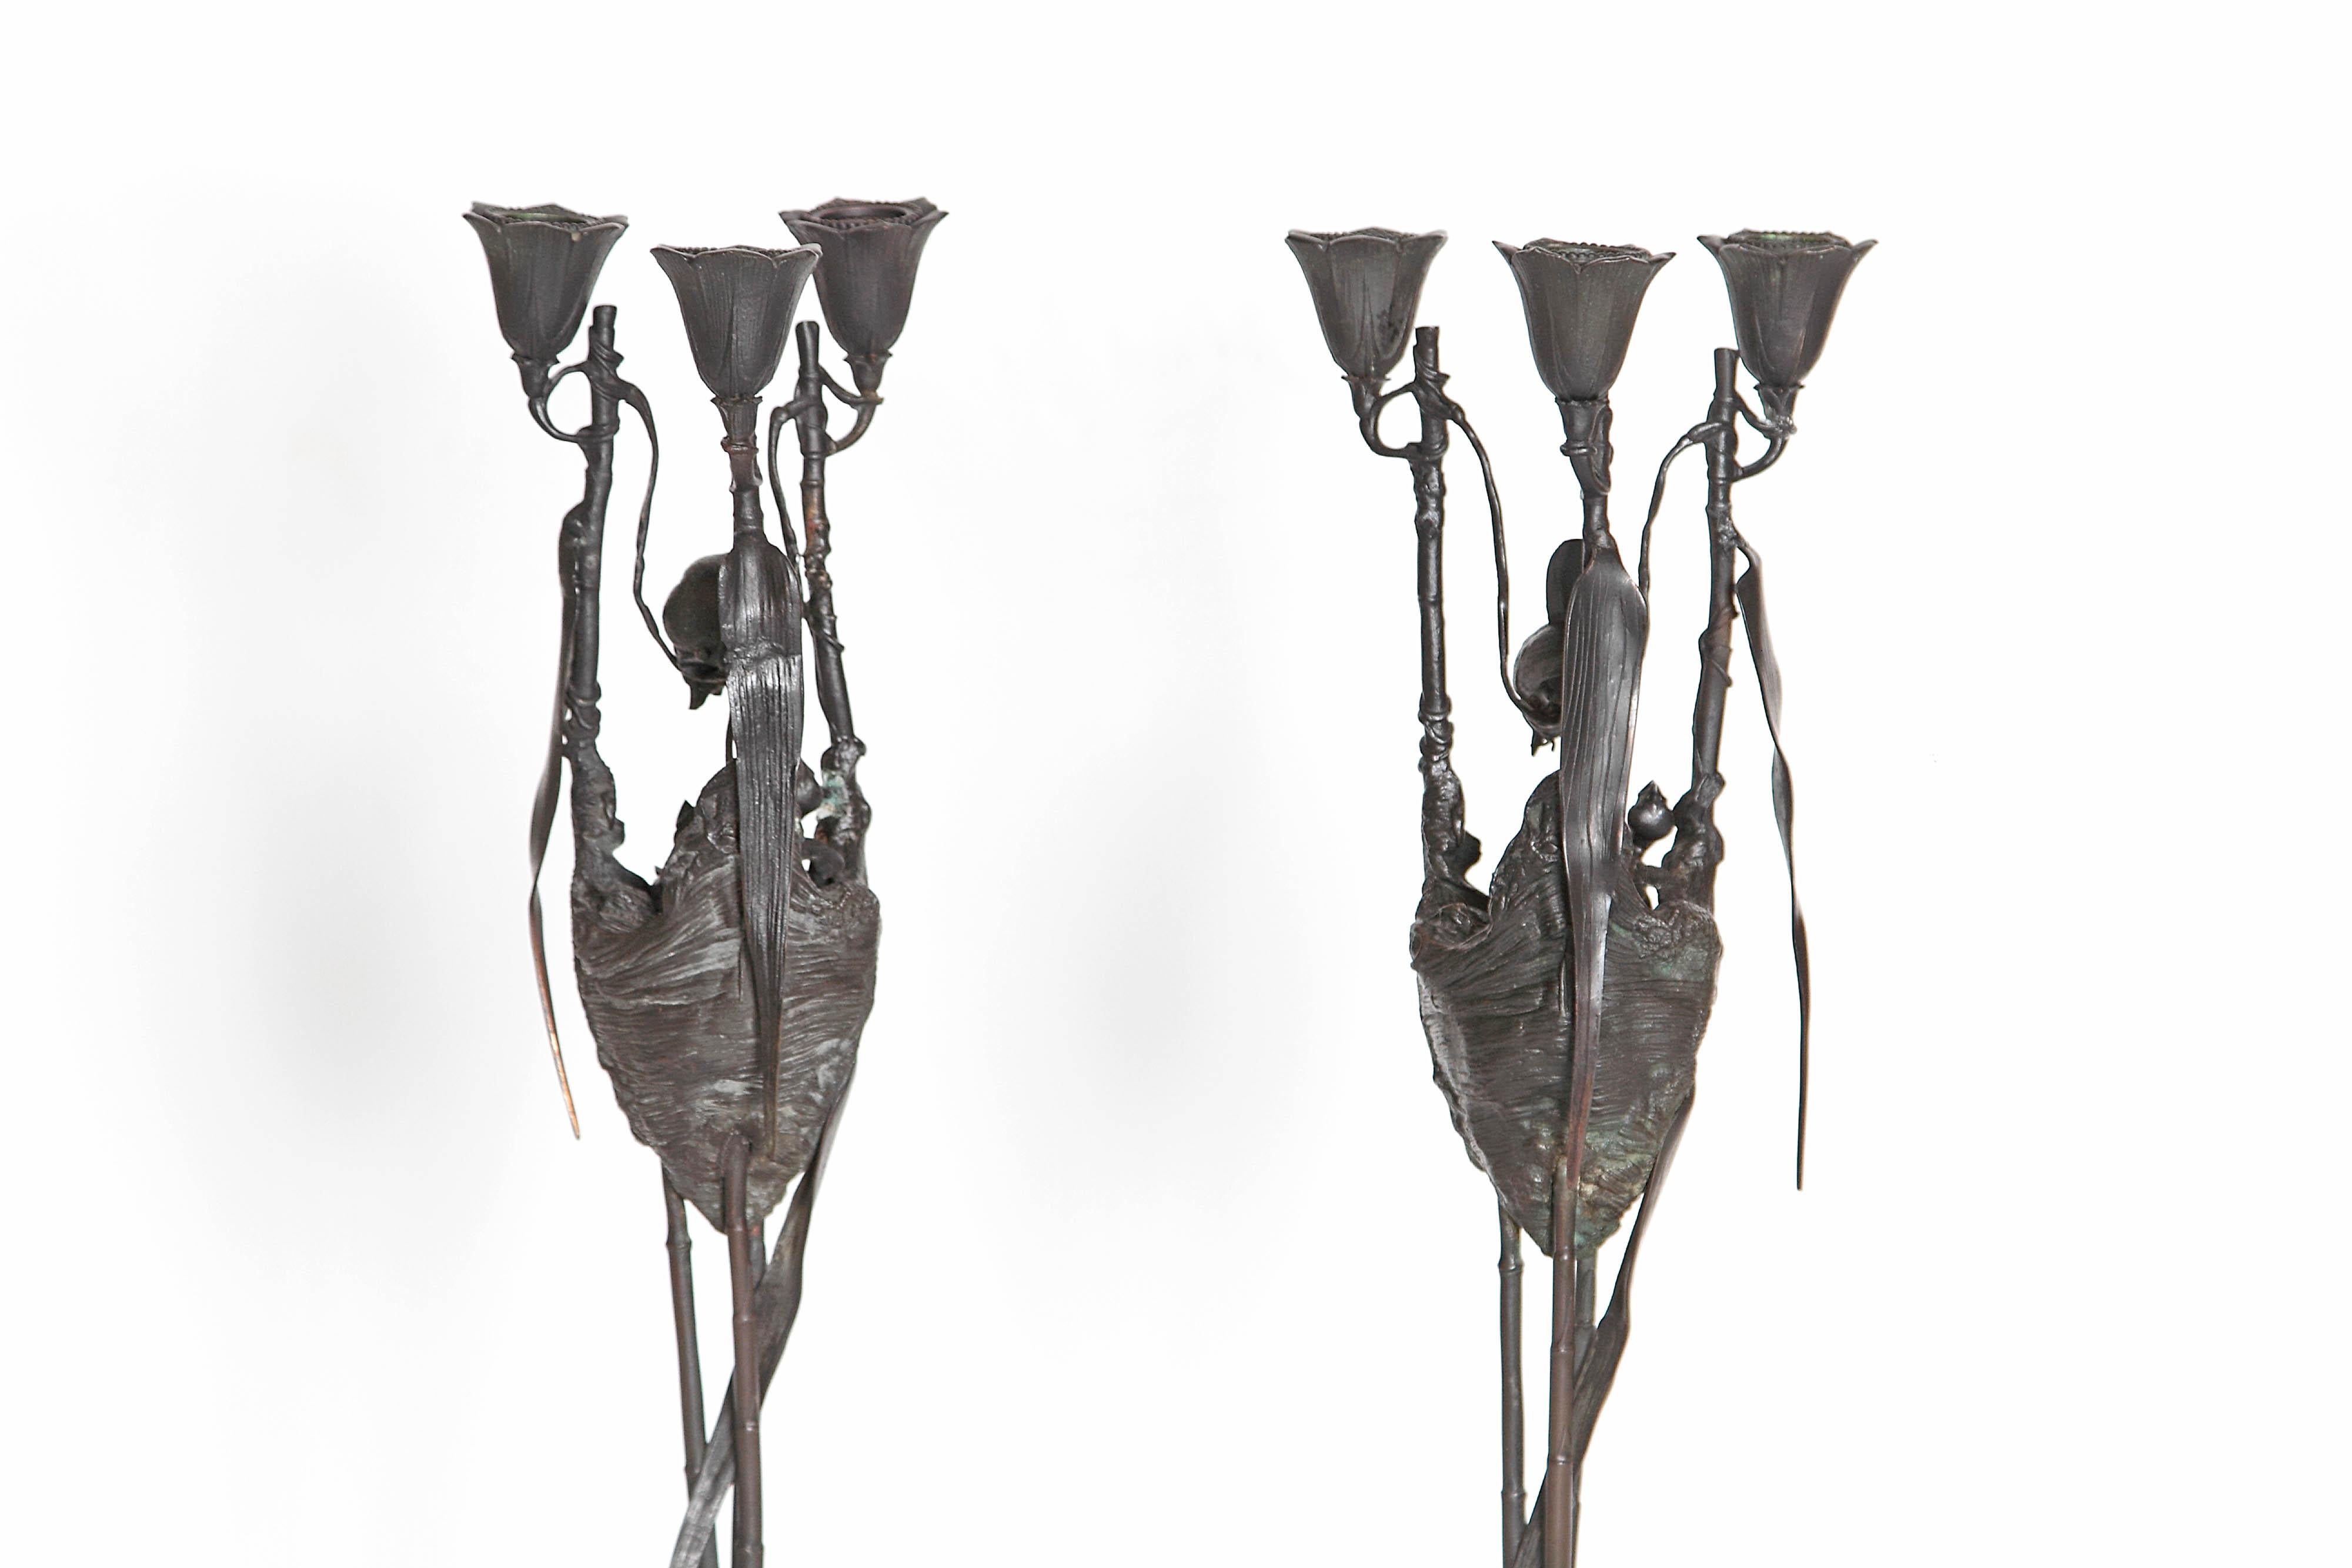 Auguste-Nicolas Cain, Pair of French Candelabra with Bird's Nest 4